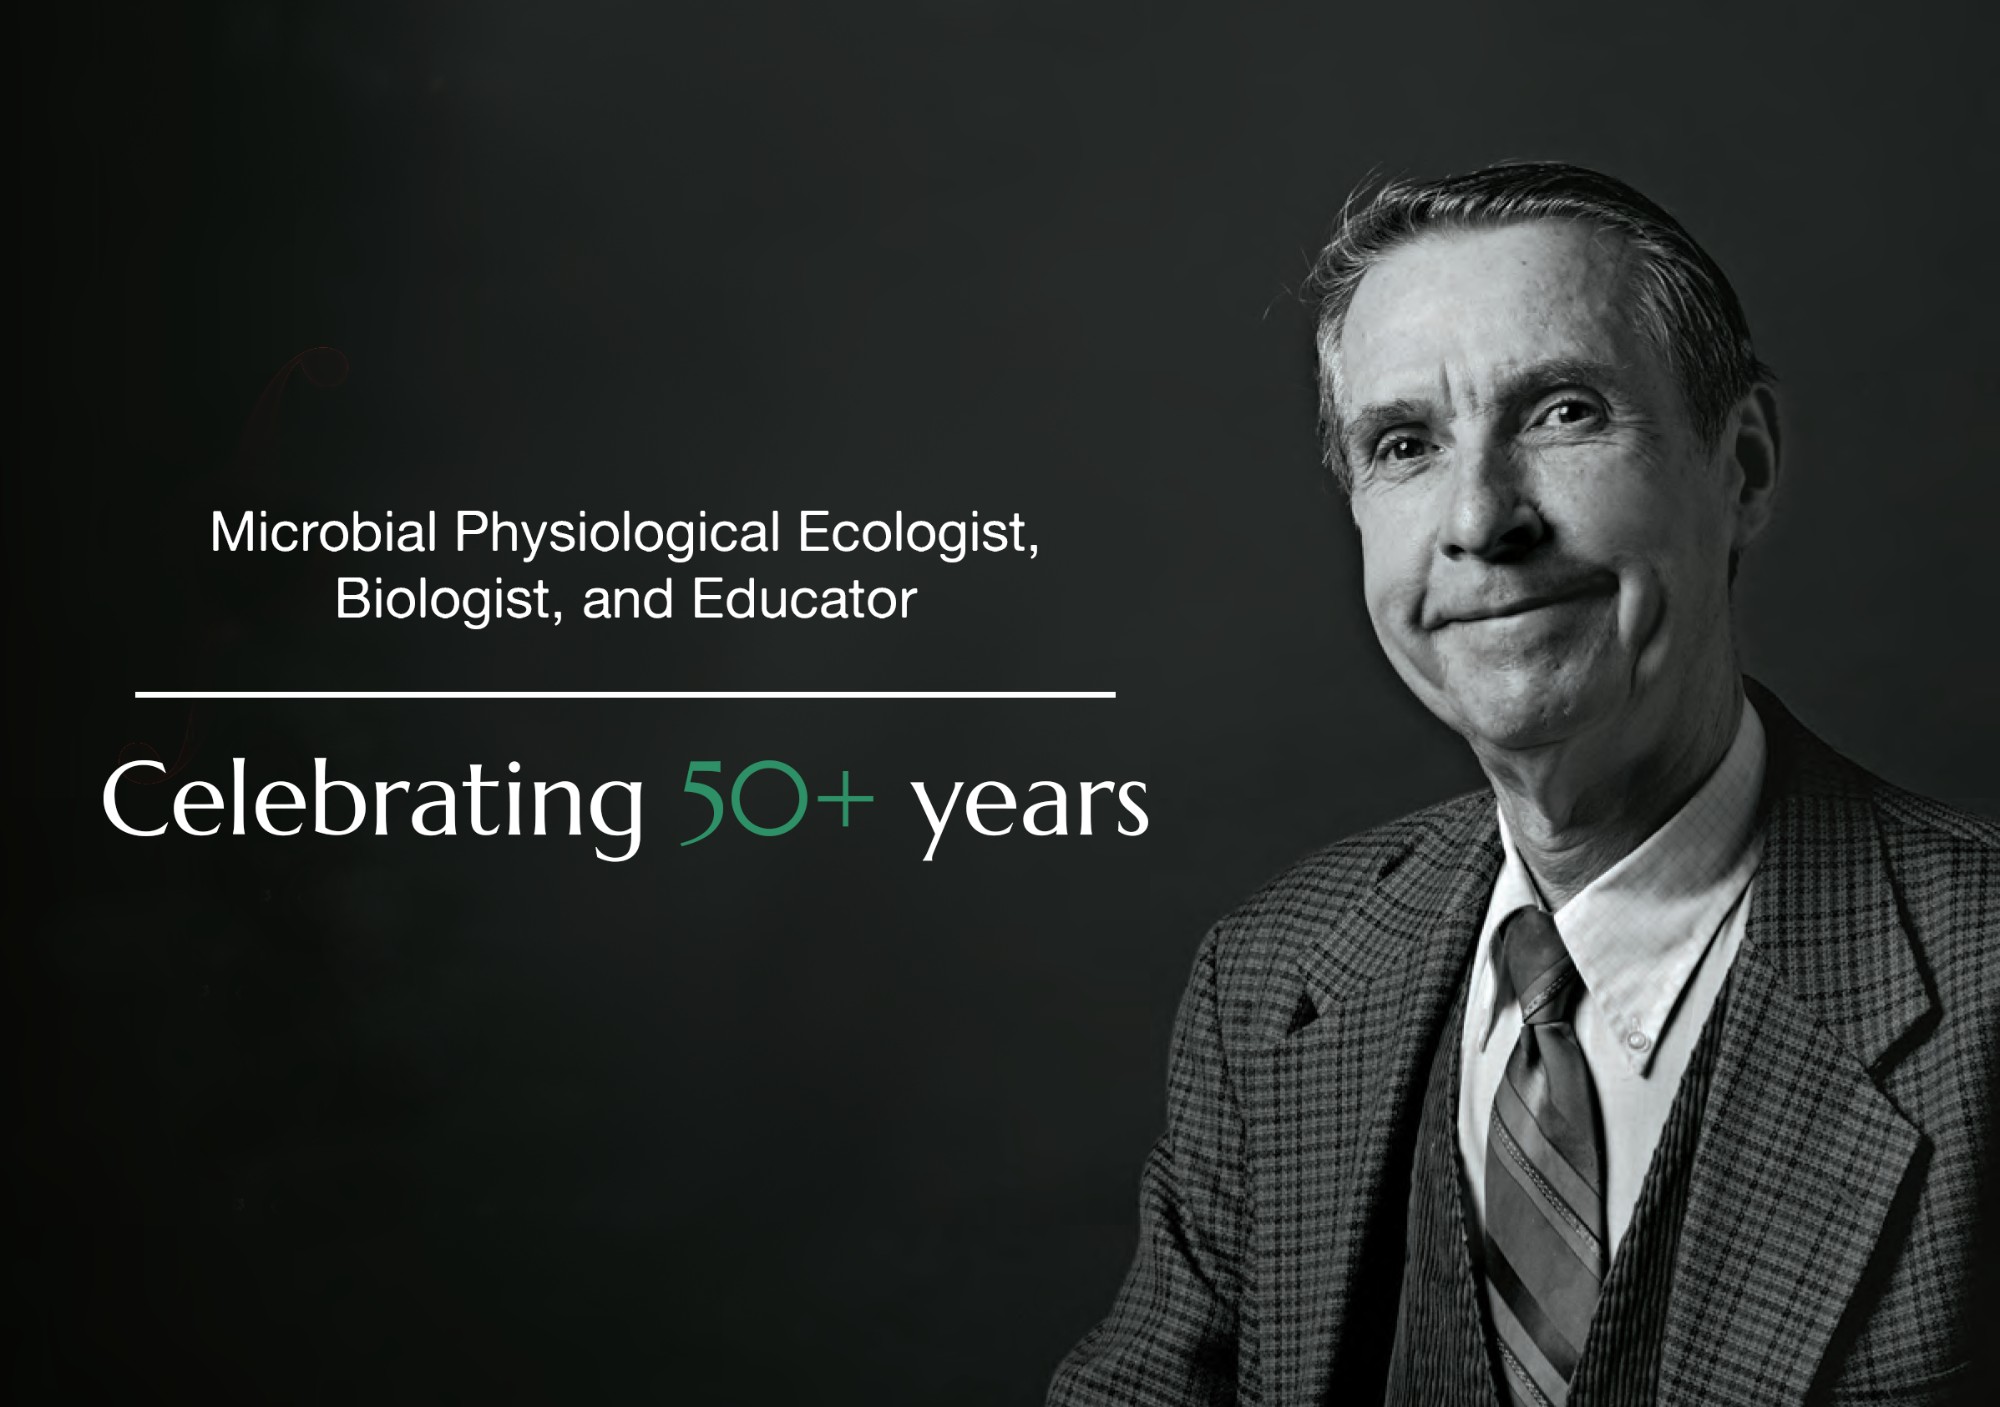 O. Roger Anderson: Microbial Physiological Ecologist, Biologist, and Educator